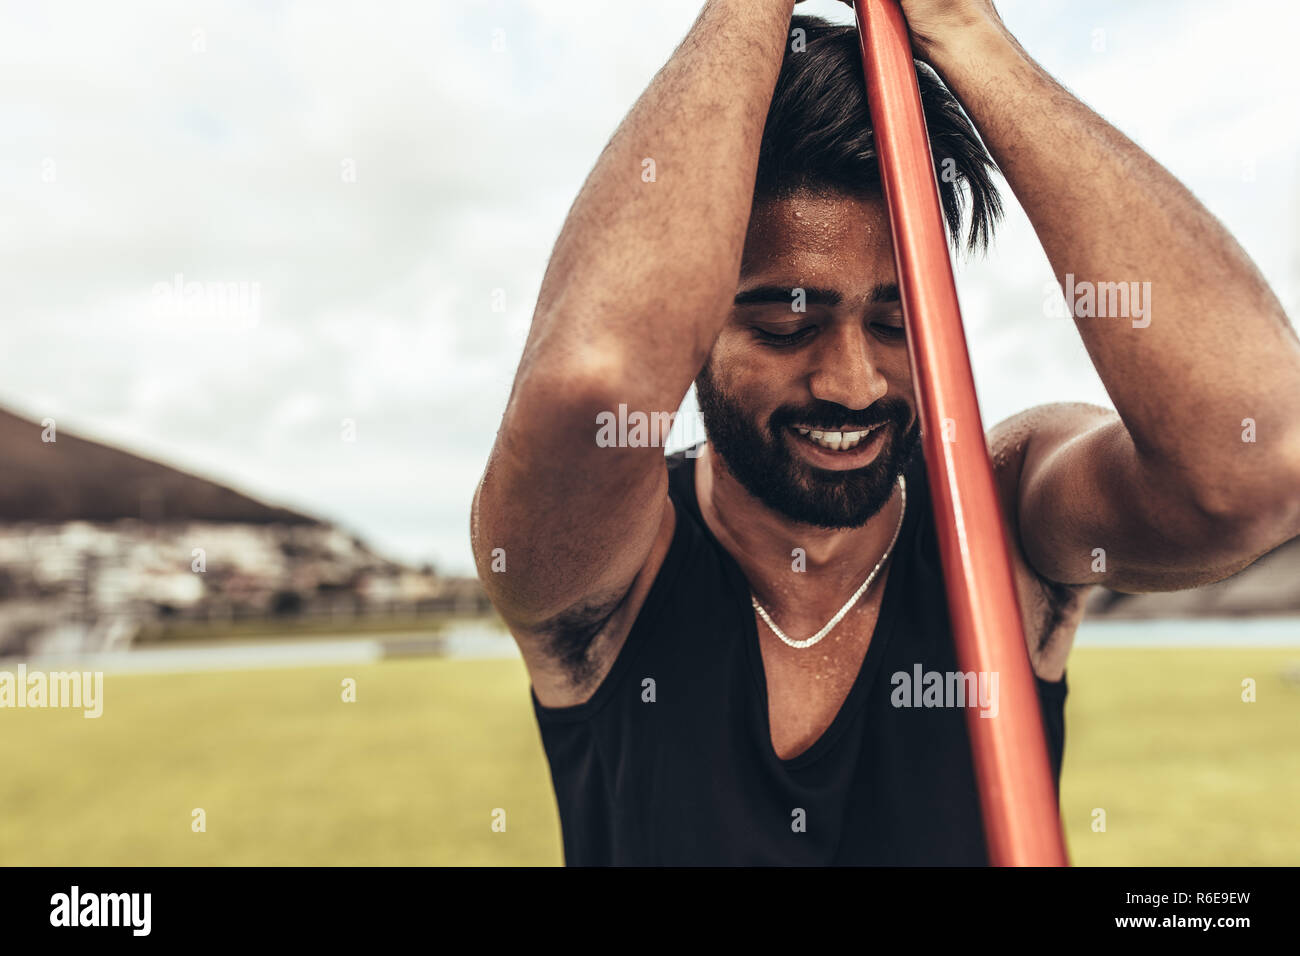 Smiling athlete relaxing during his javelin training standing in the field holding a javelin. Close up of an athlete standing in a stadium training ho Stock Photo